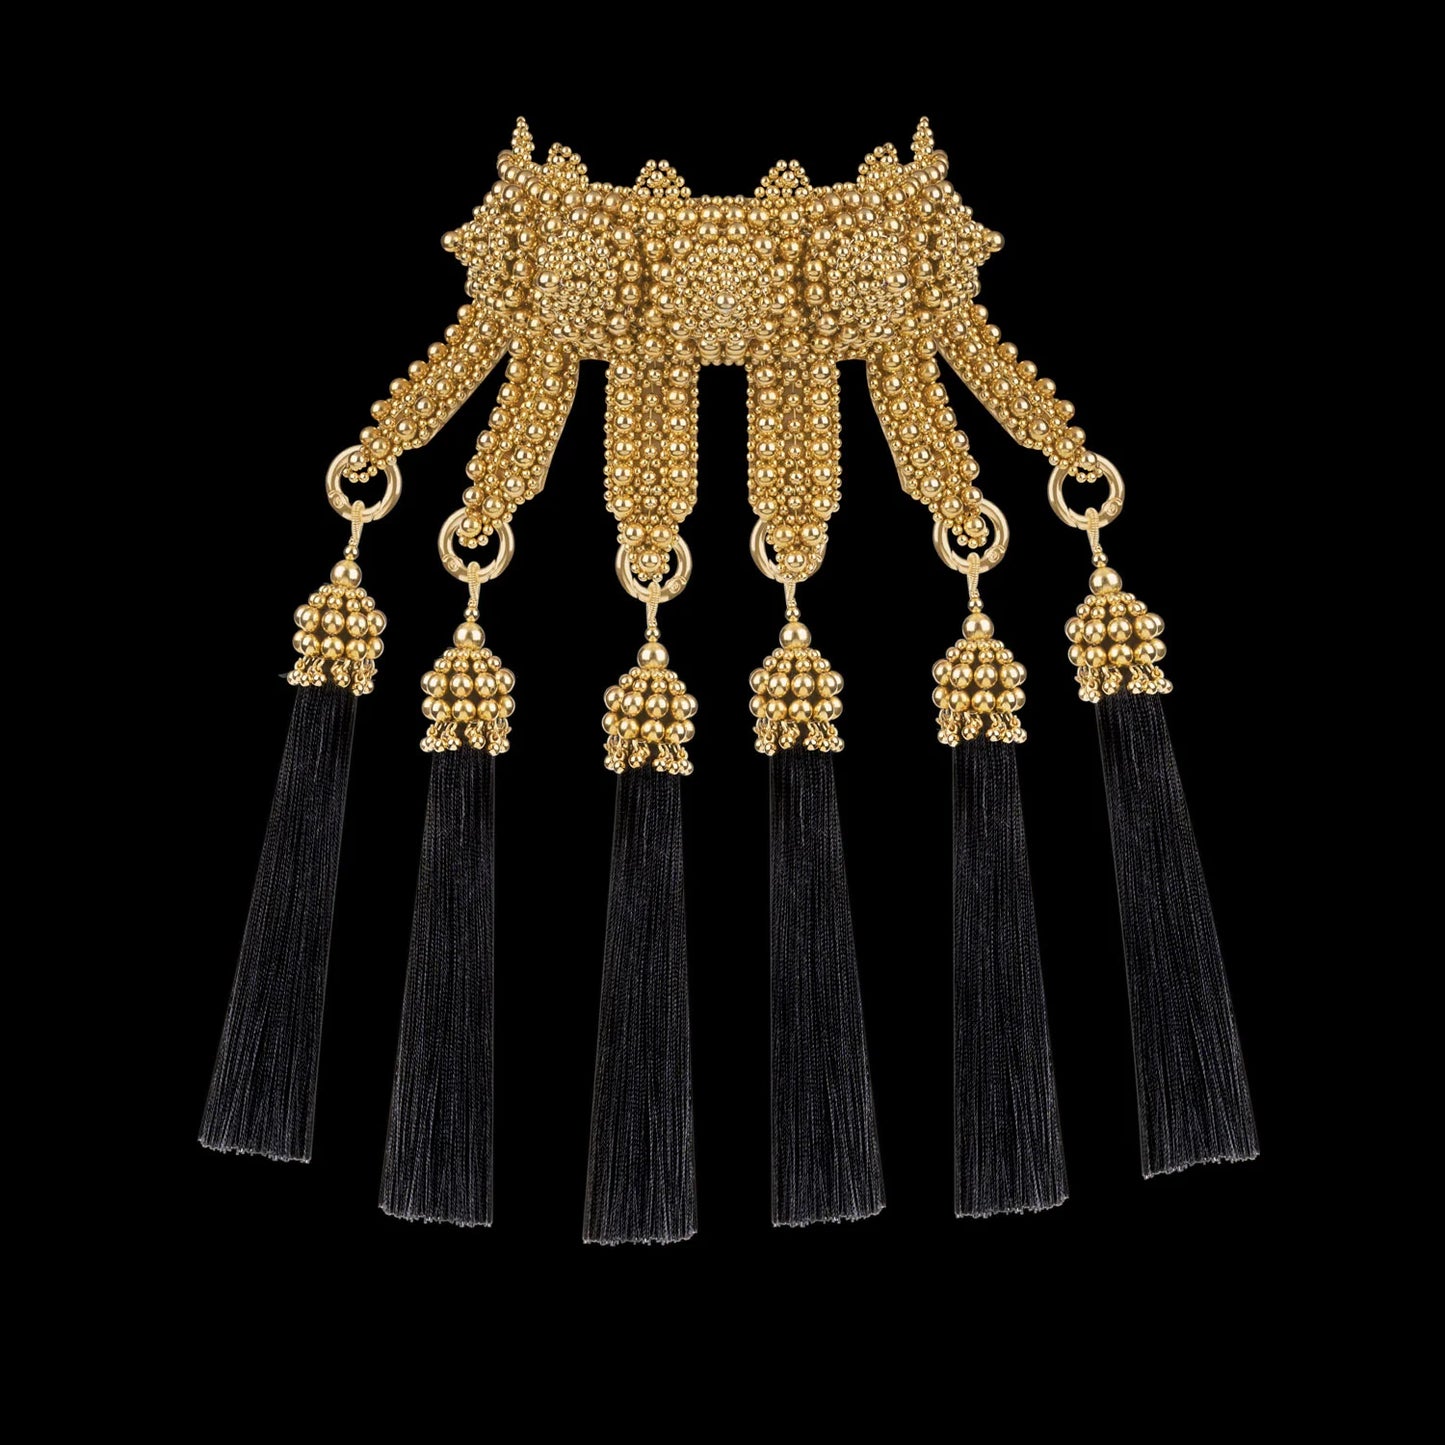 Gold eingana choker w/removable tassels in 5 color options